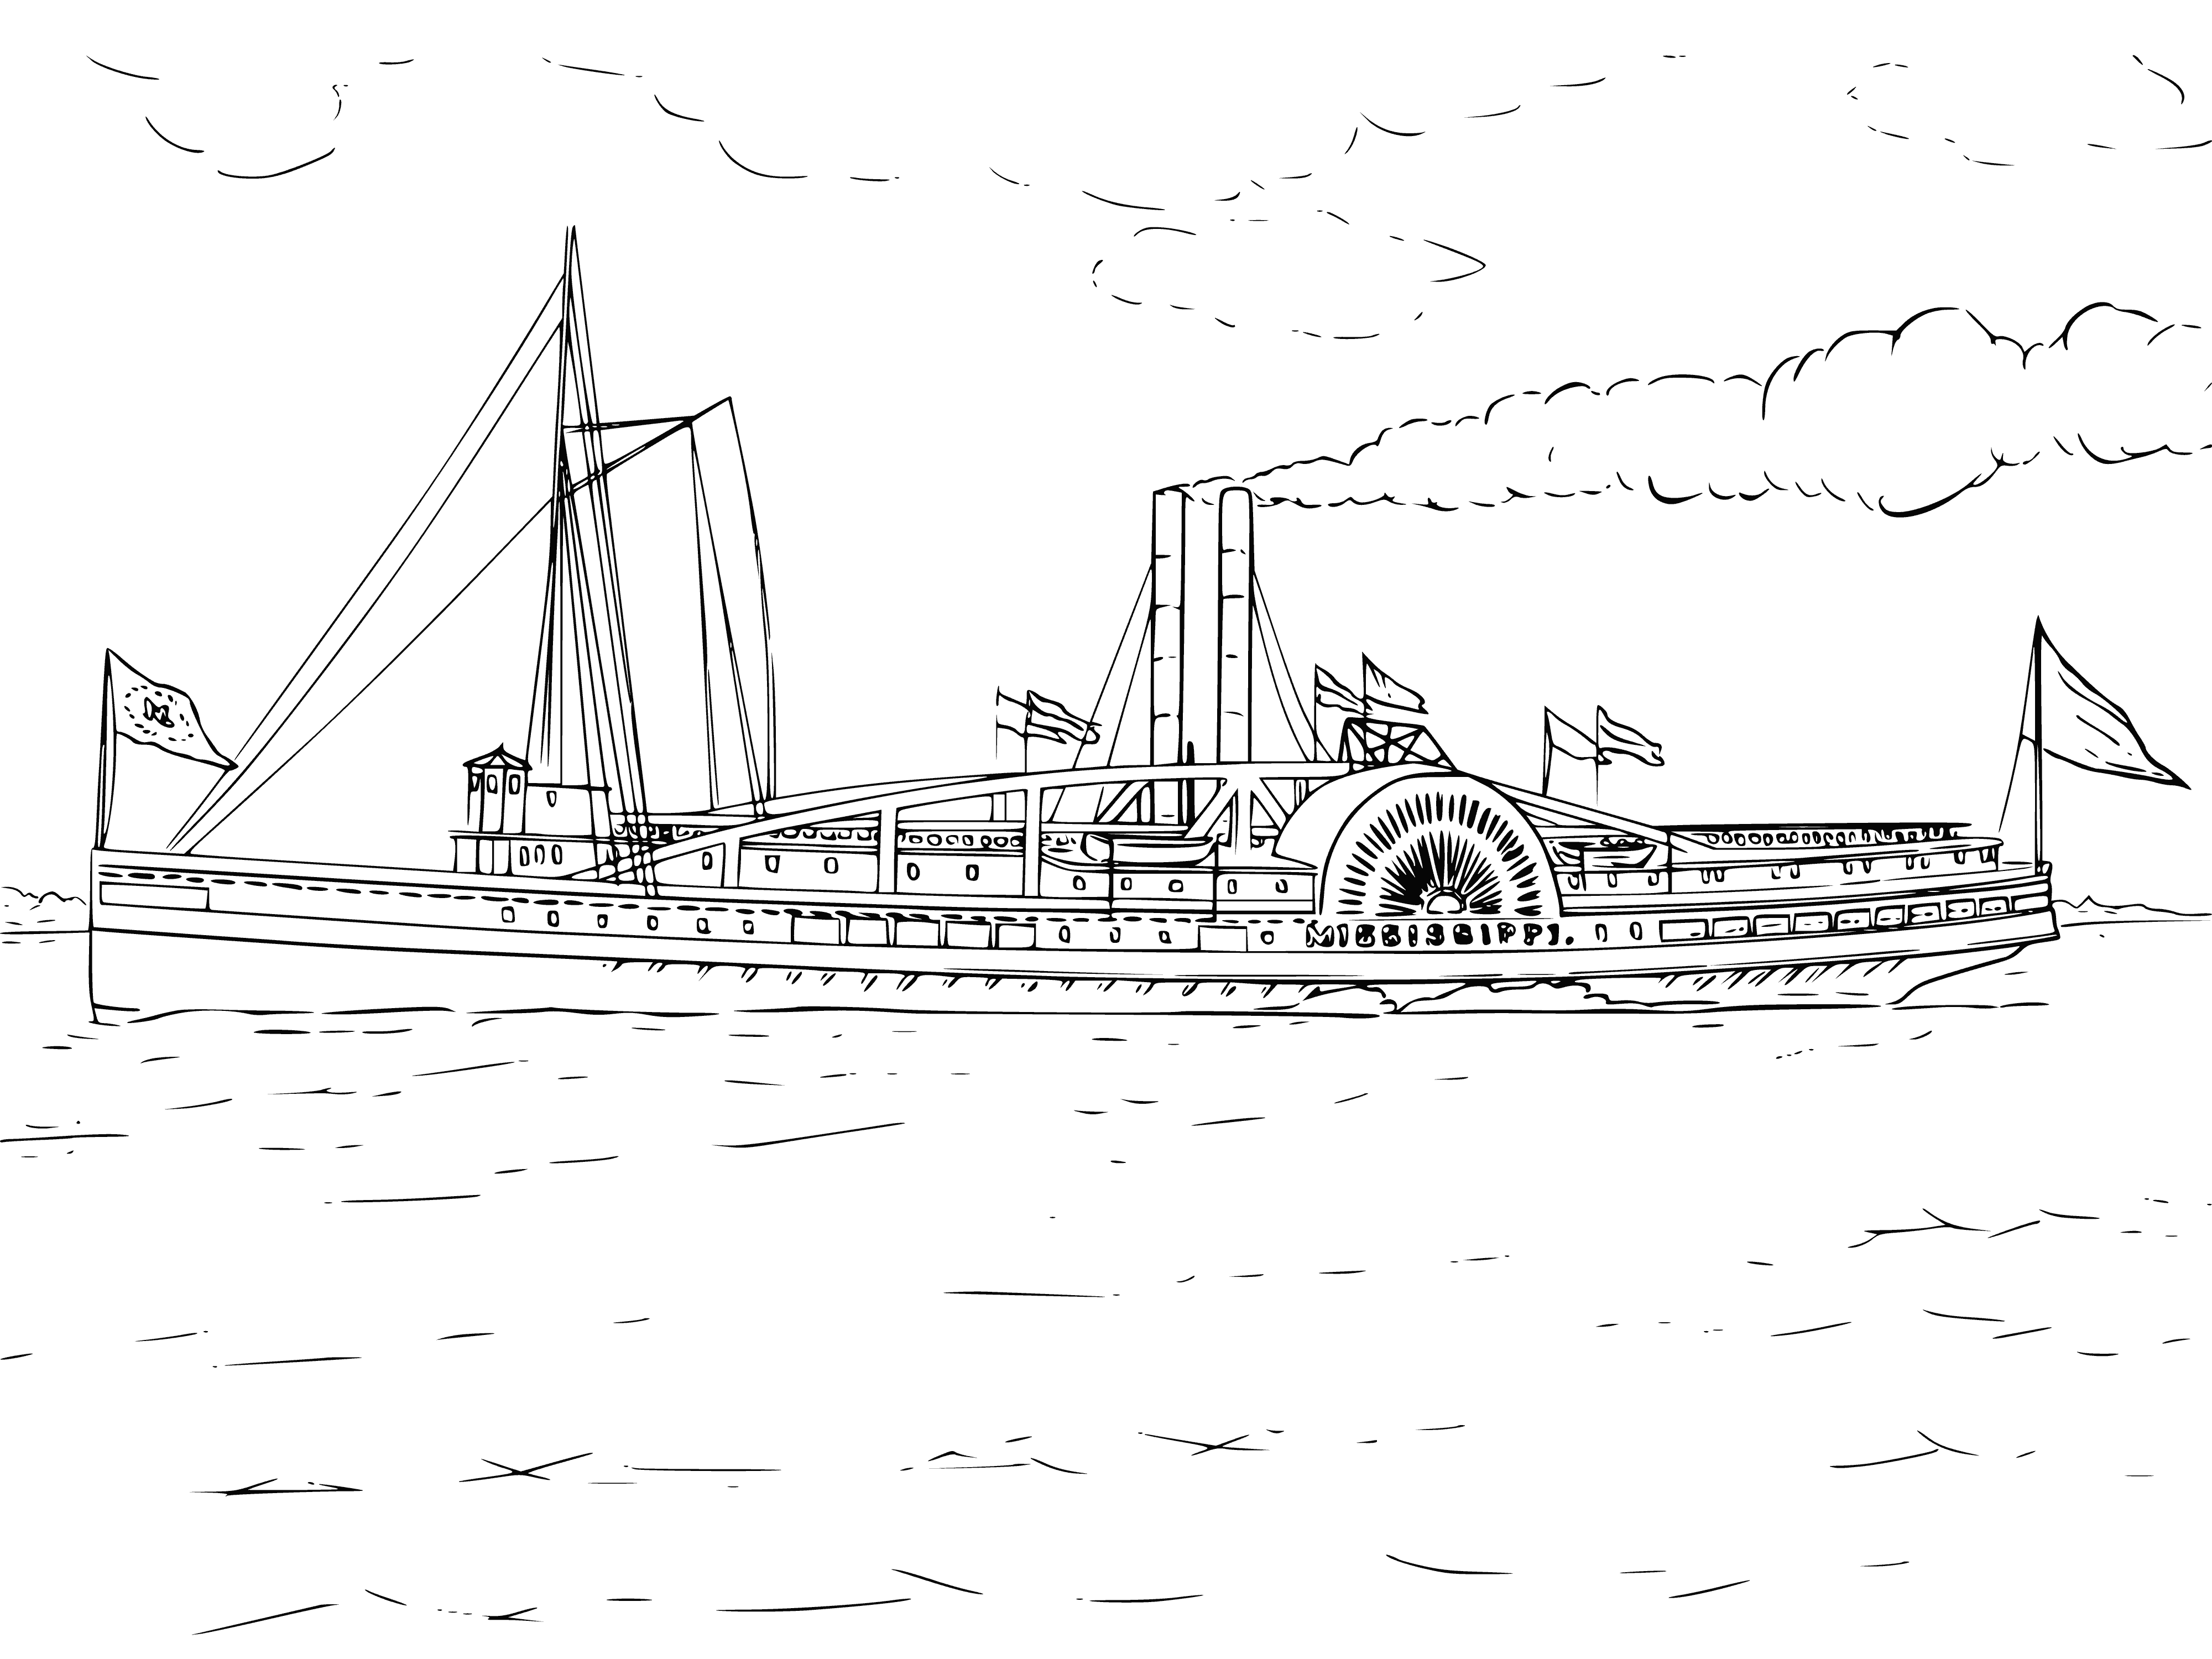 coloring page: Large motor ship has many levels incl. back deck filled with people + many large sails powering it on the water.